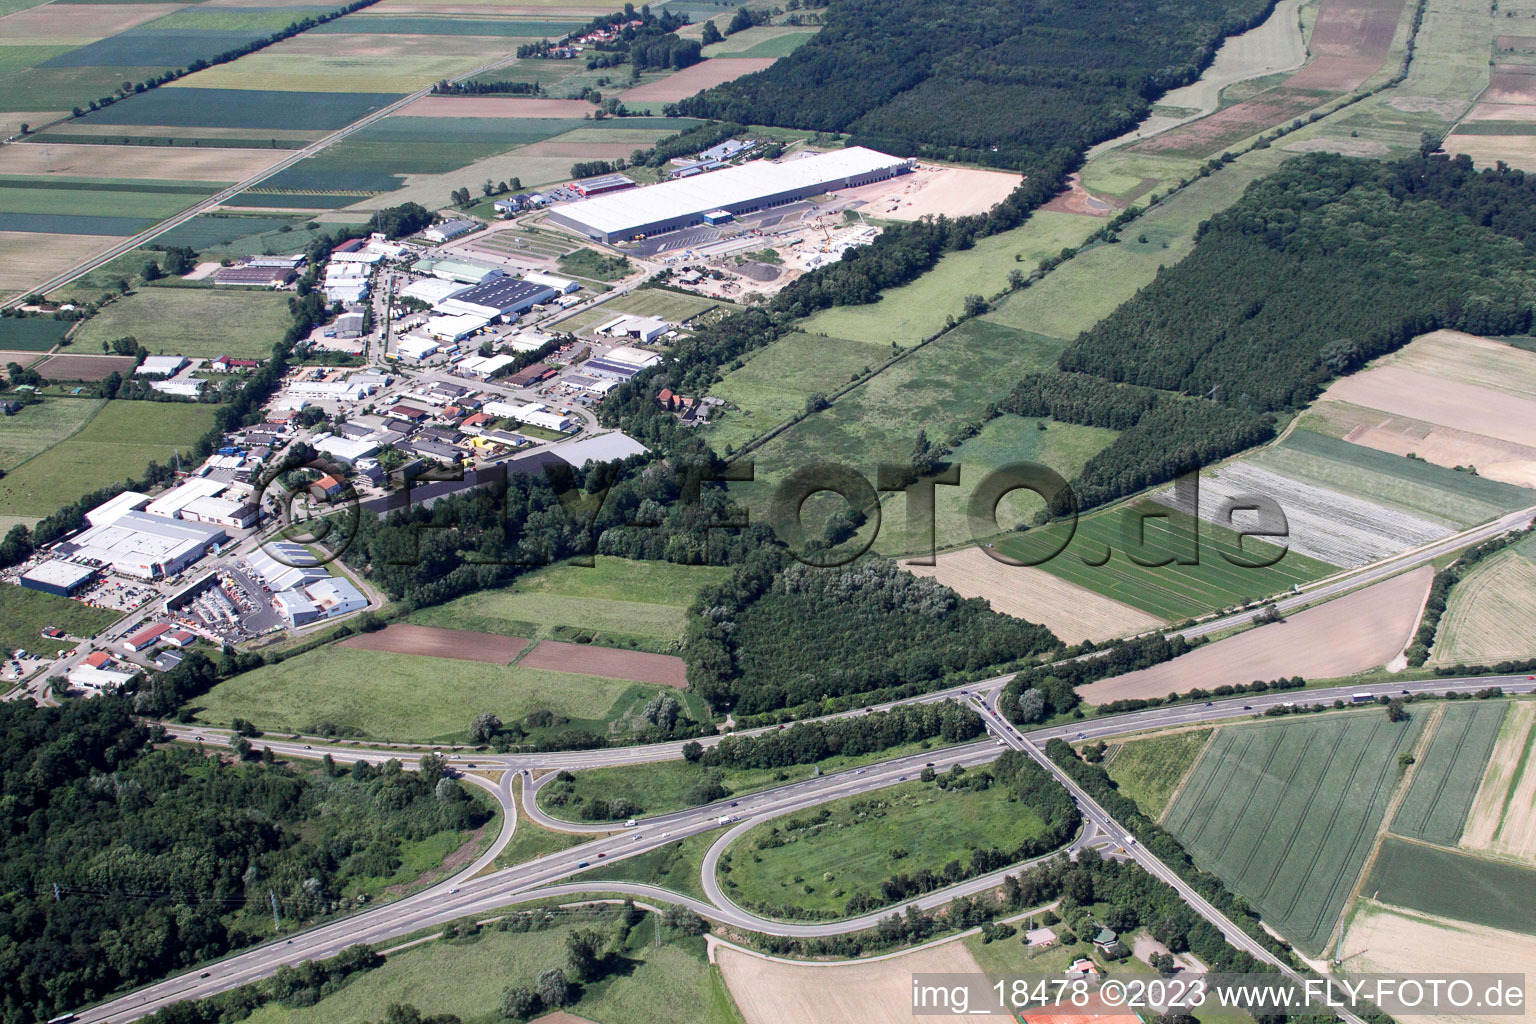 Coincidence logistics center in the district Minderslachen in Kandel in the state Rhineland-Palatinate, Germany seen from above